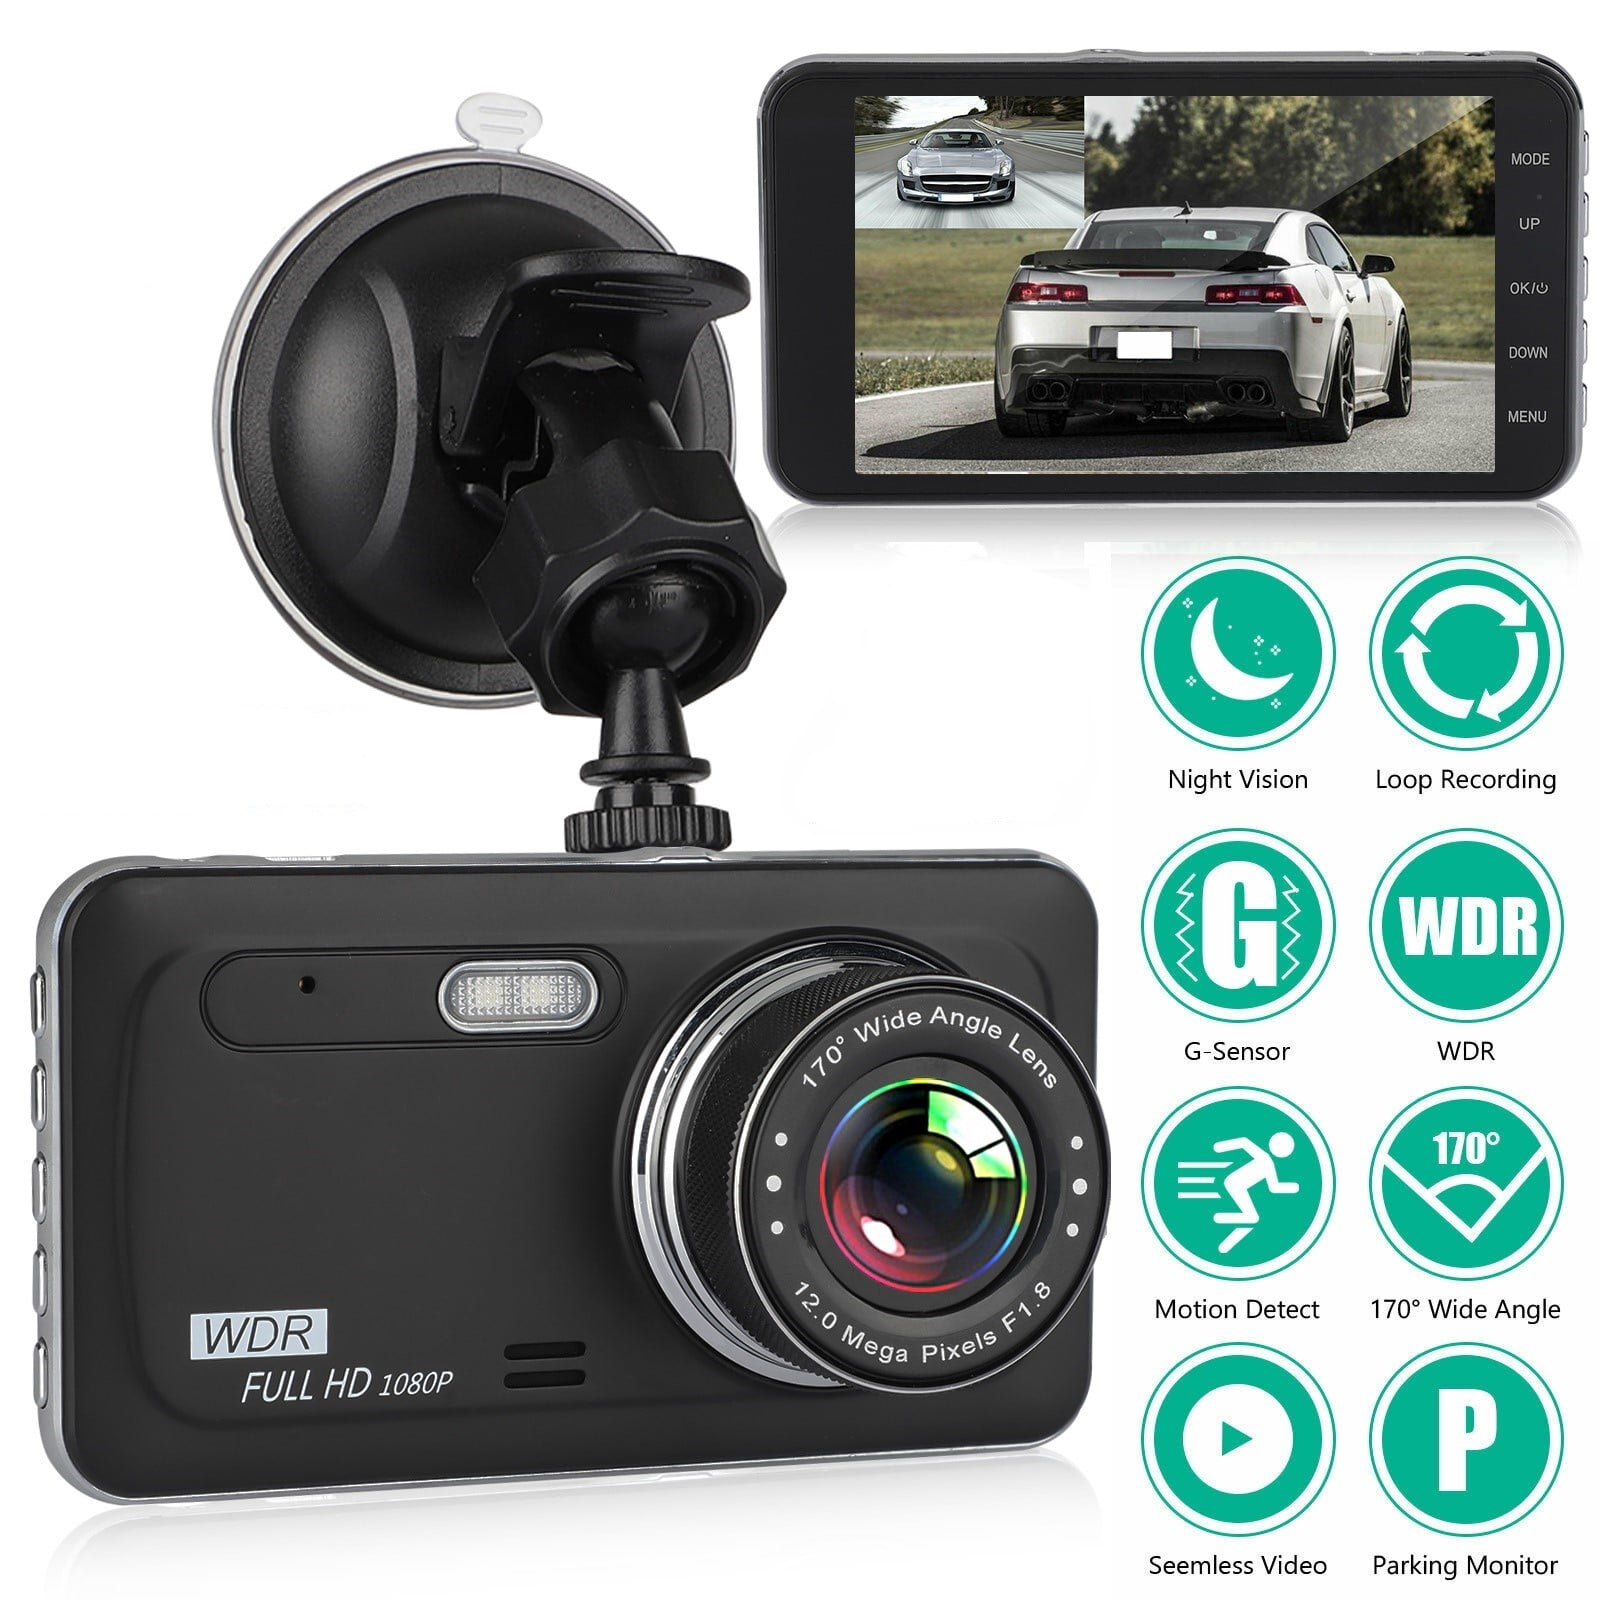 Kingfansion 2.4 Full HD 1080P Dash Cam Dashboard Camera Car Driving Recorder DVR 170 Degree Wide Angle Dash Cameras for Cars with Night Vision 